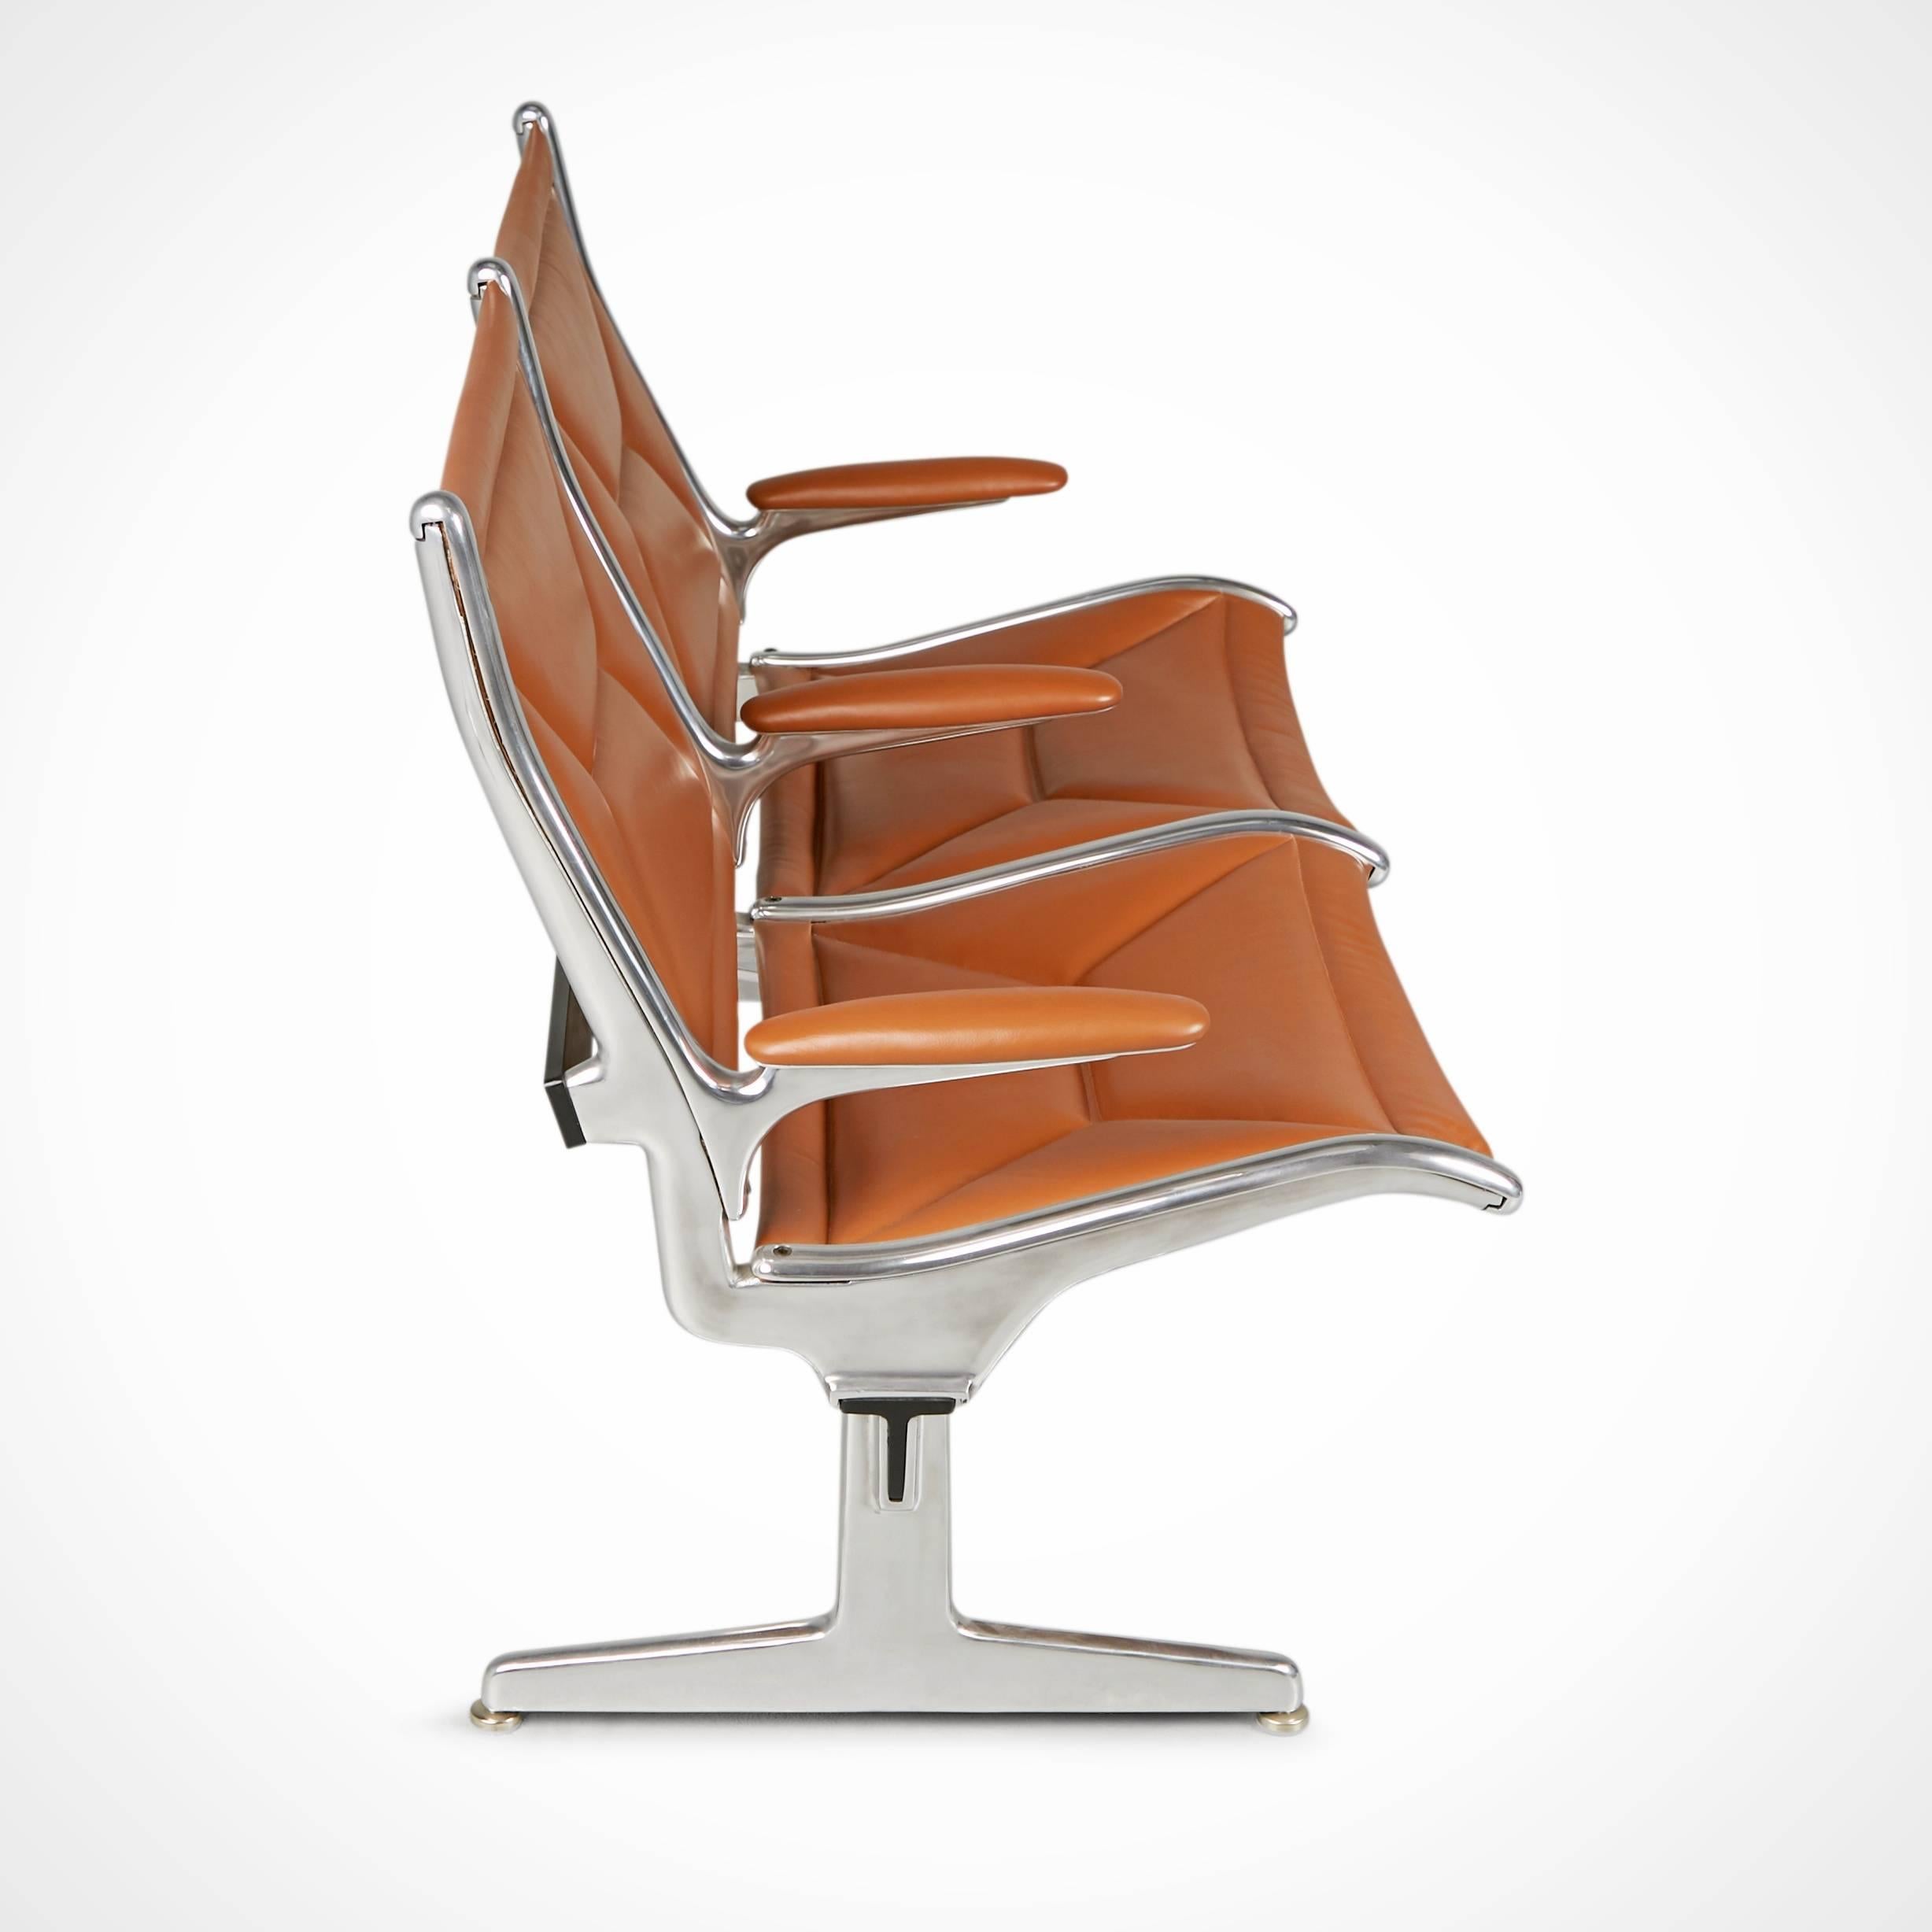 Mid-Century Modern Edelman Leather Two-Seat Tandem Sling by Charles Eames for Herman Miller